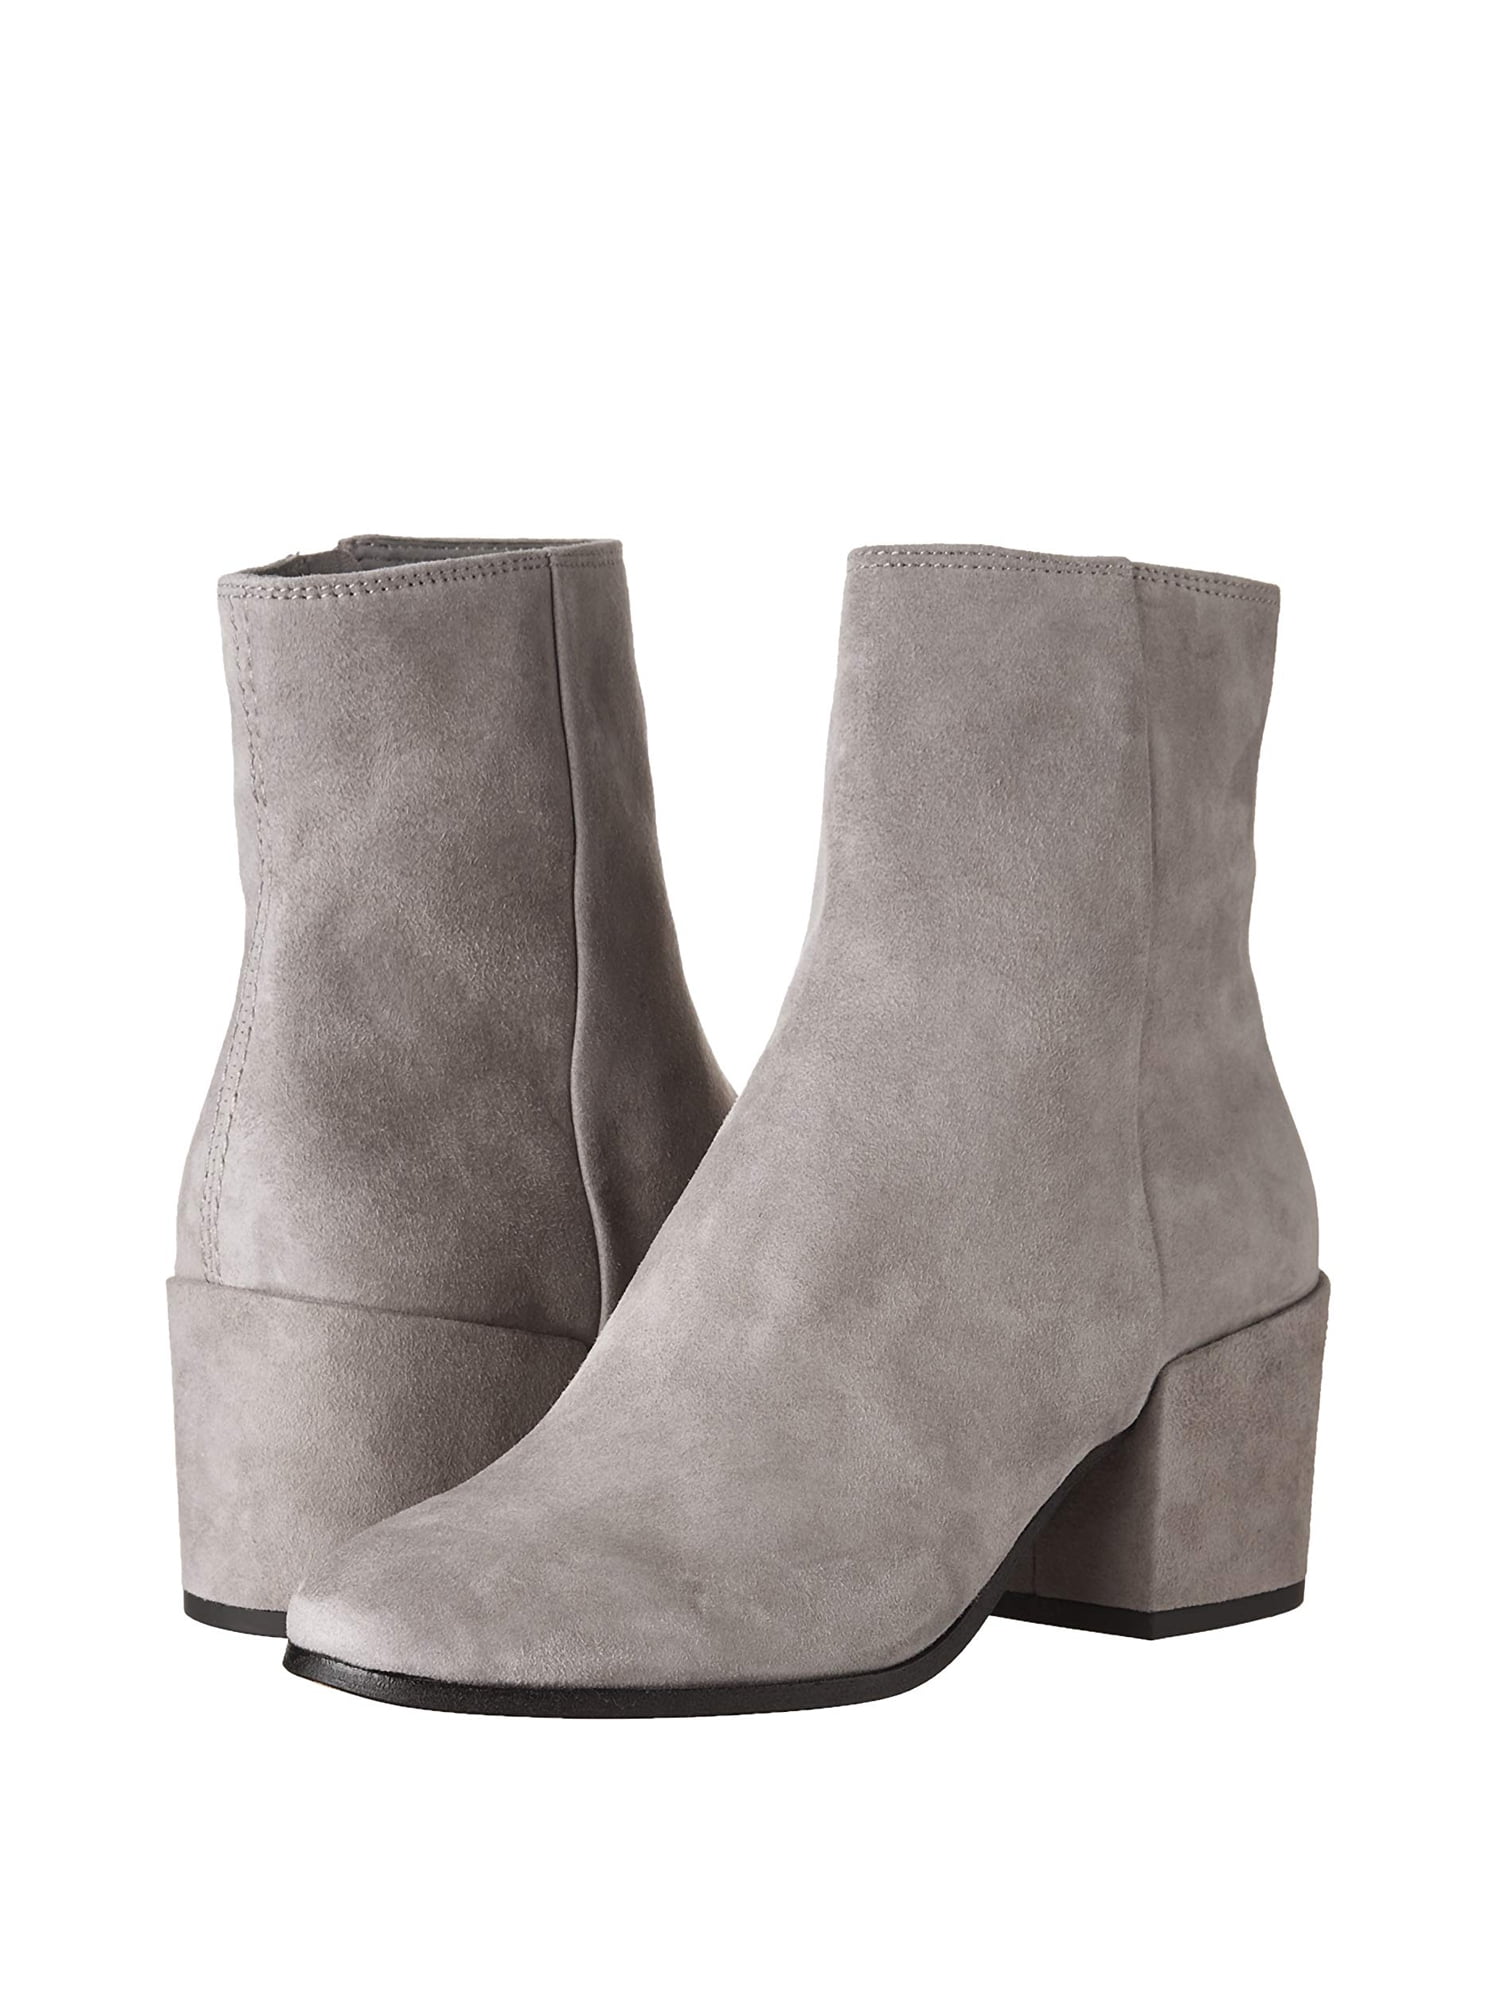 Dolce Vita Maude Women's Ankle Boots 